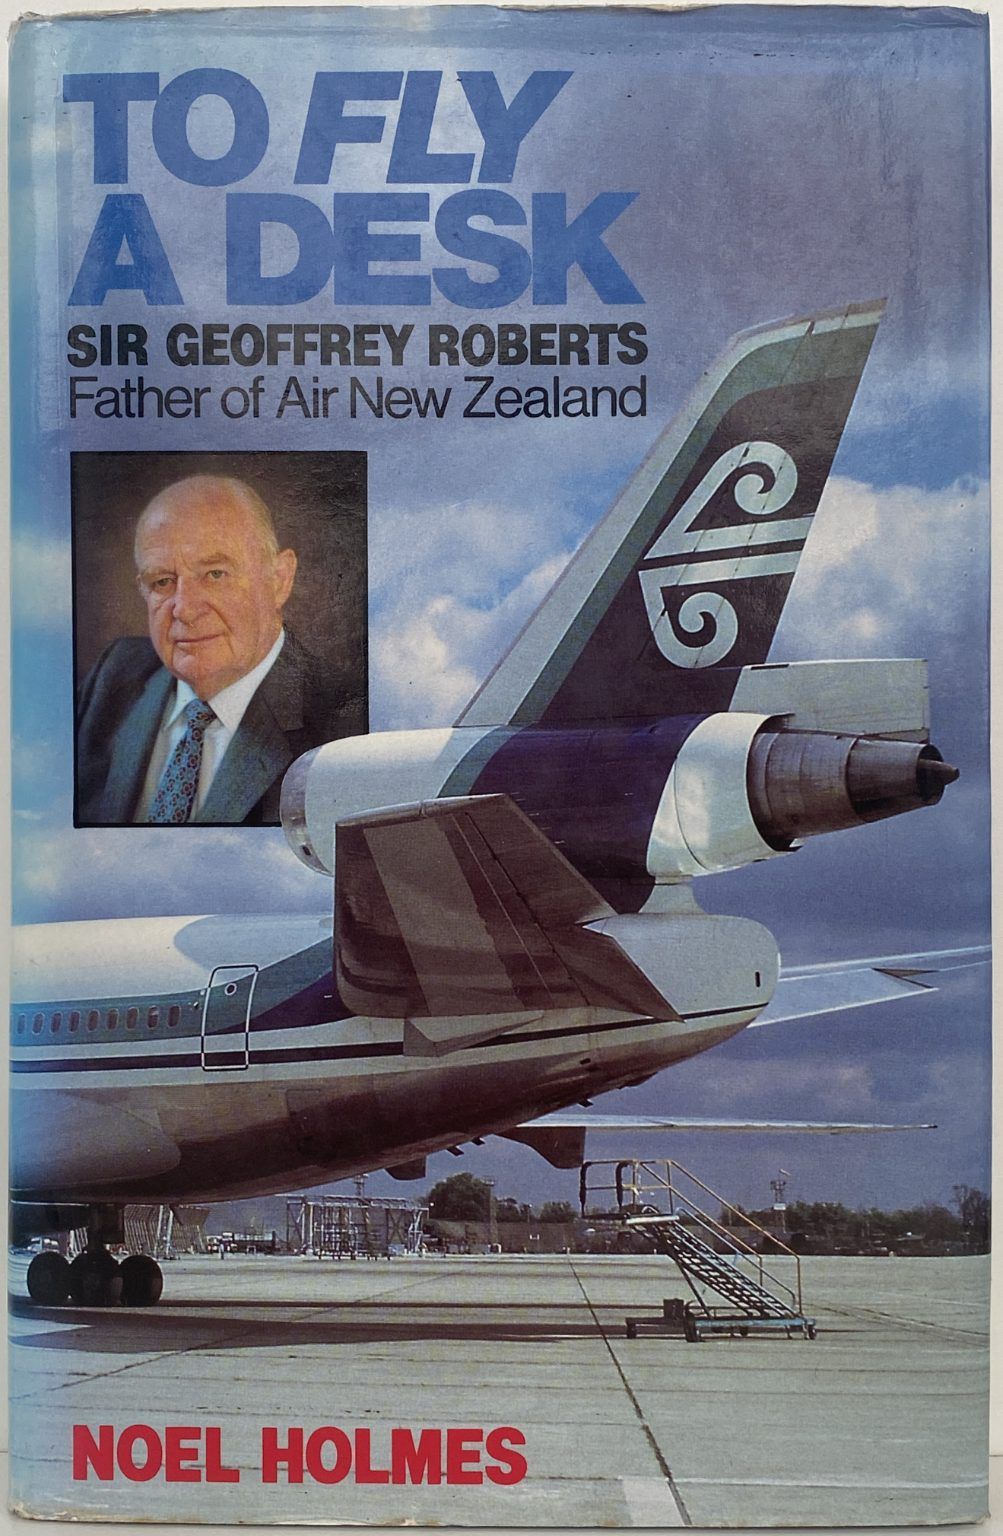 TO FLY A DESK: Sir Geoffrey Roberts Father of Air New Zealand